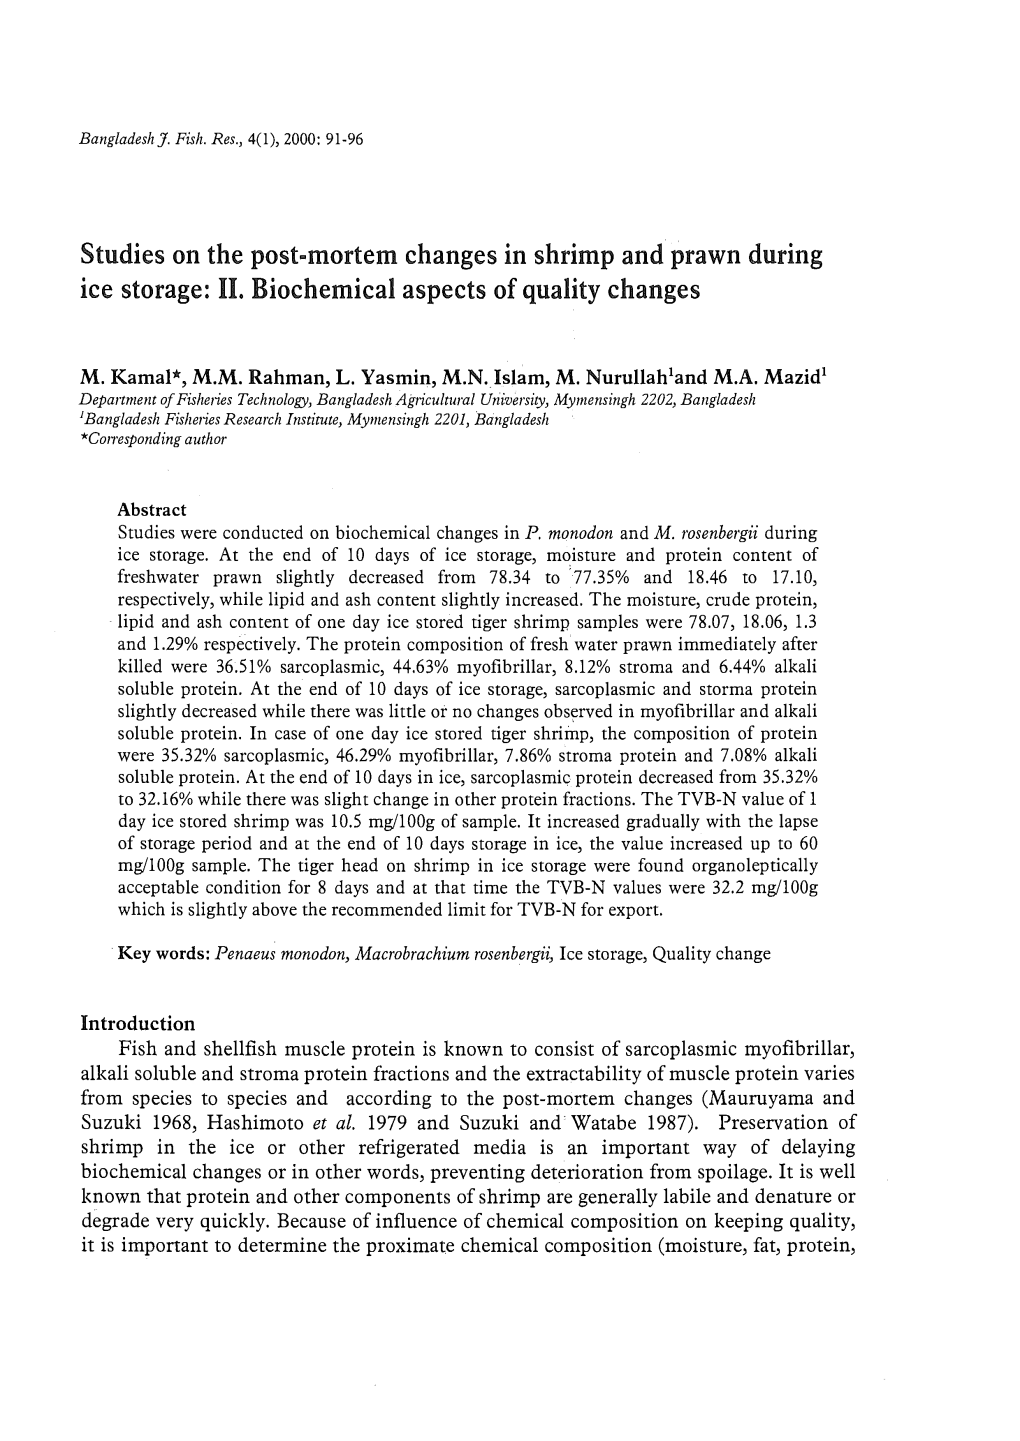 Studies on the Post-Mortem Changes in Shrimp and Prawn During Ice Storage: II